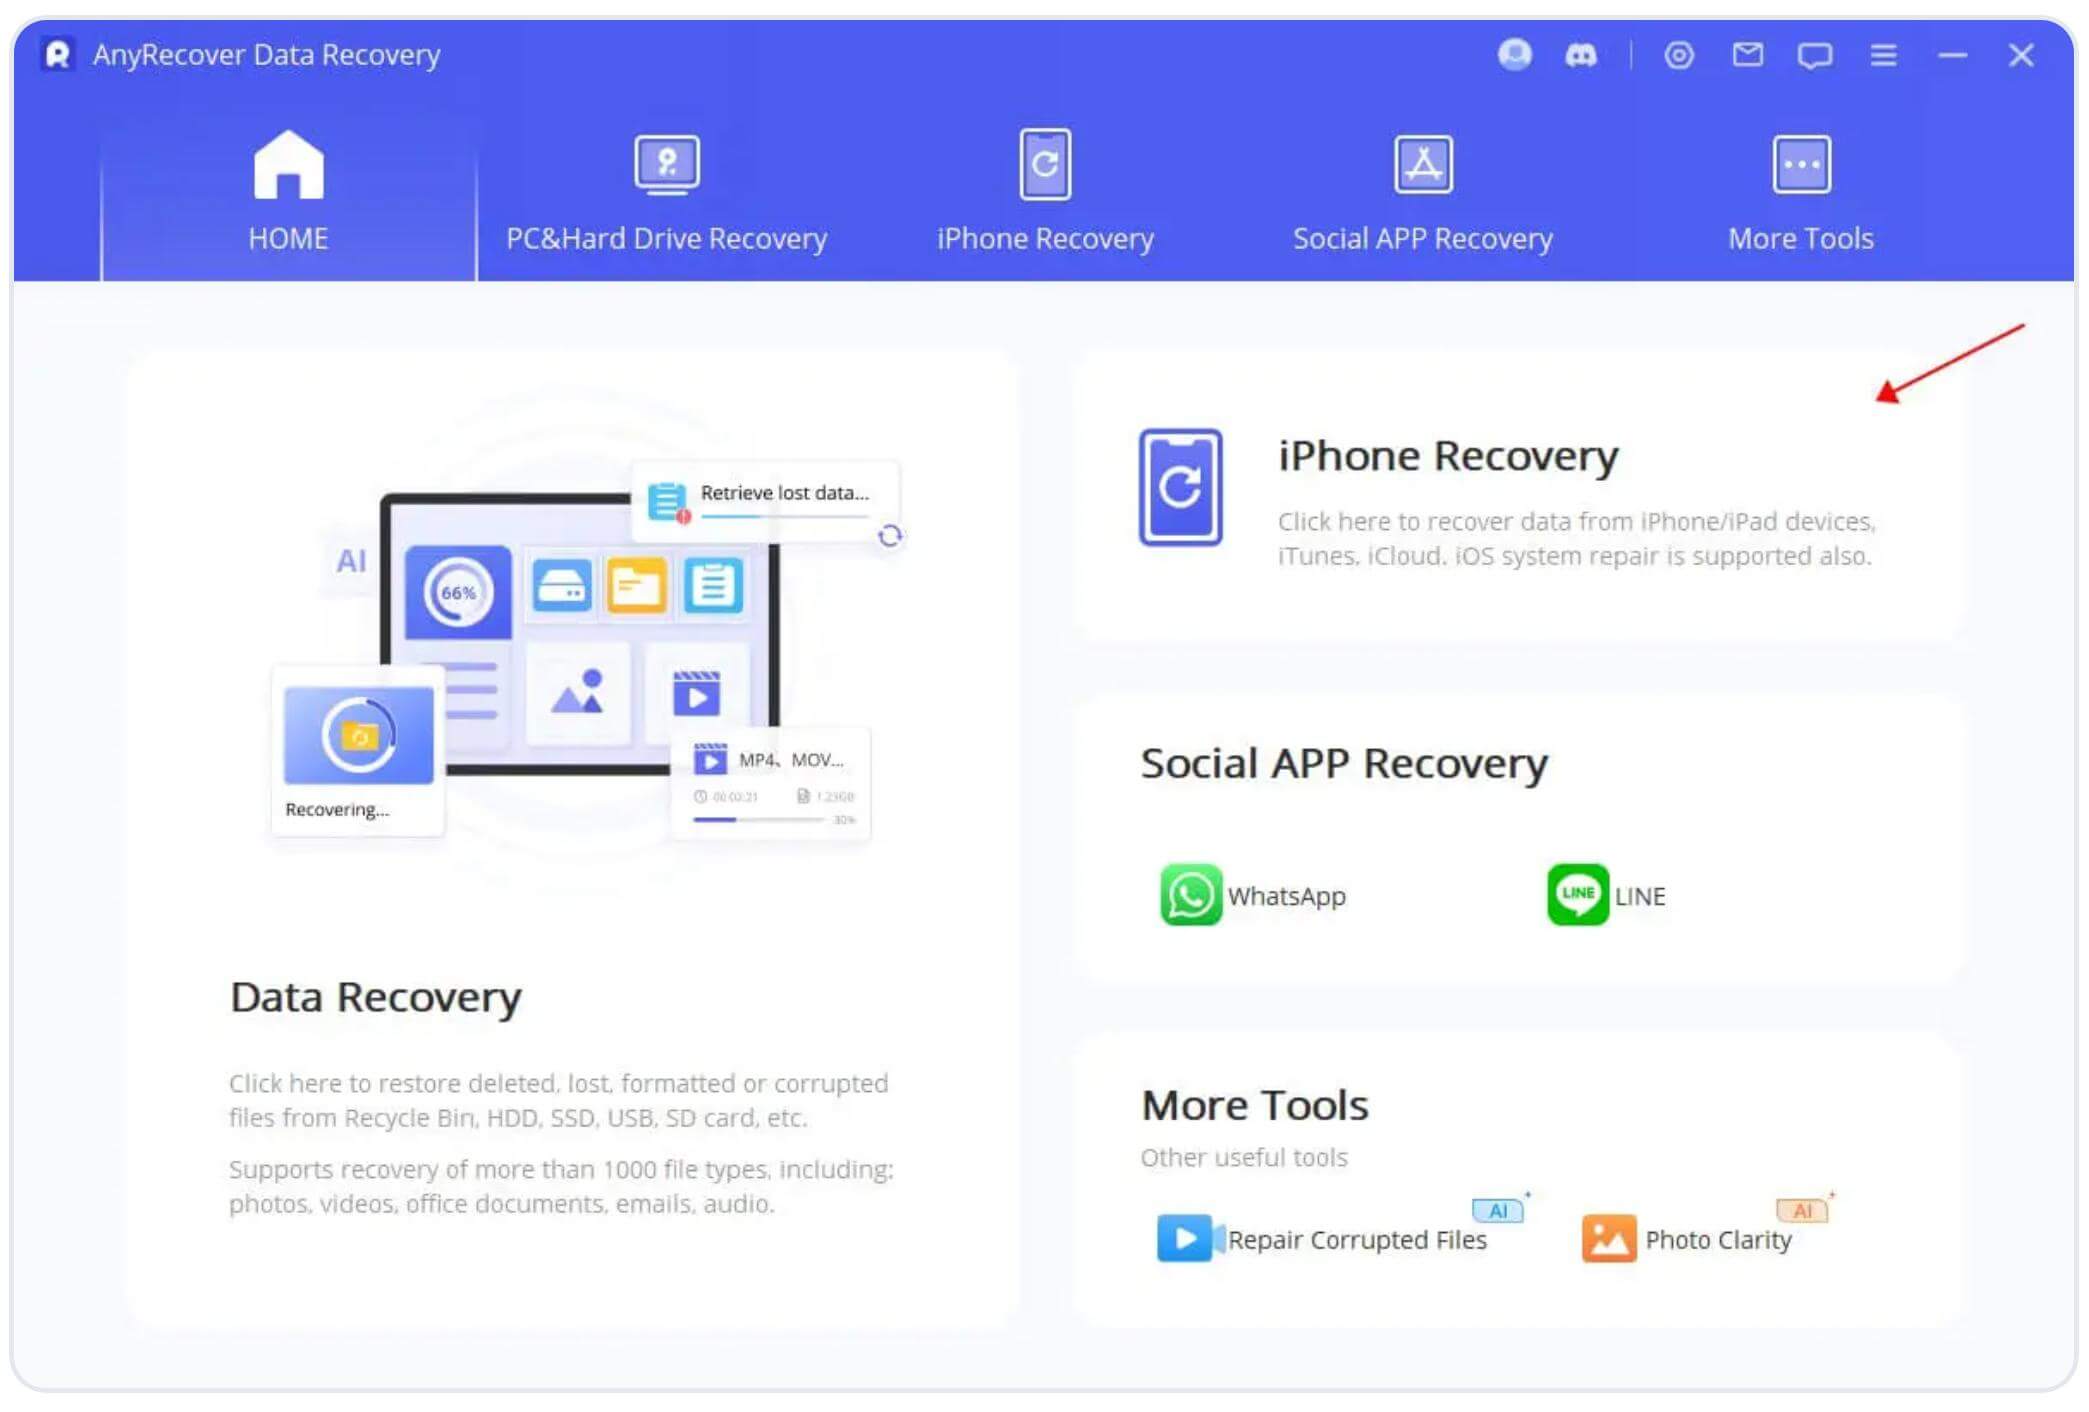 iphone recovery in anyrecover